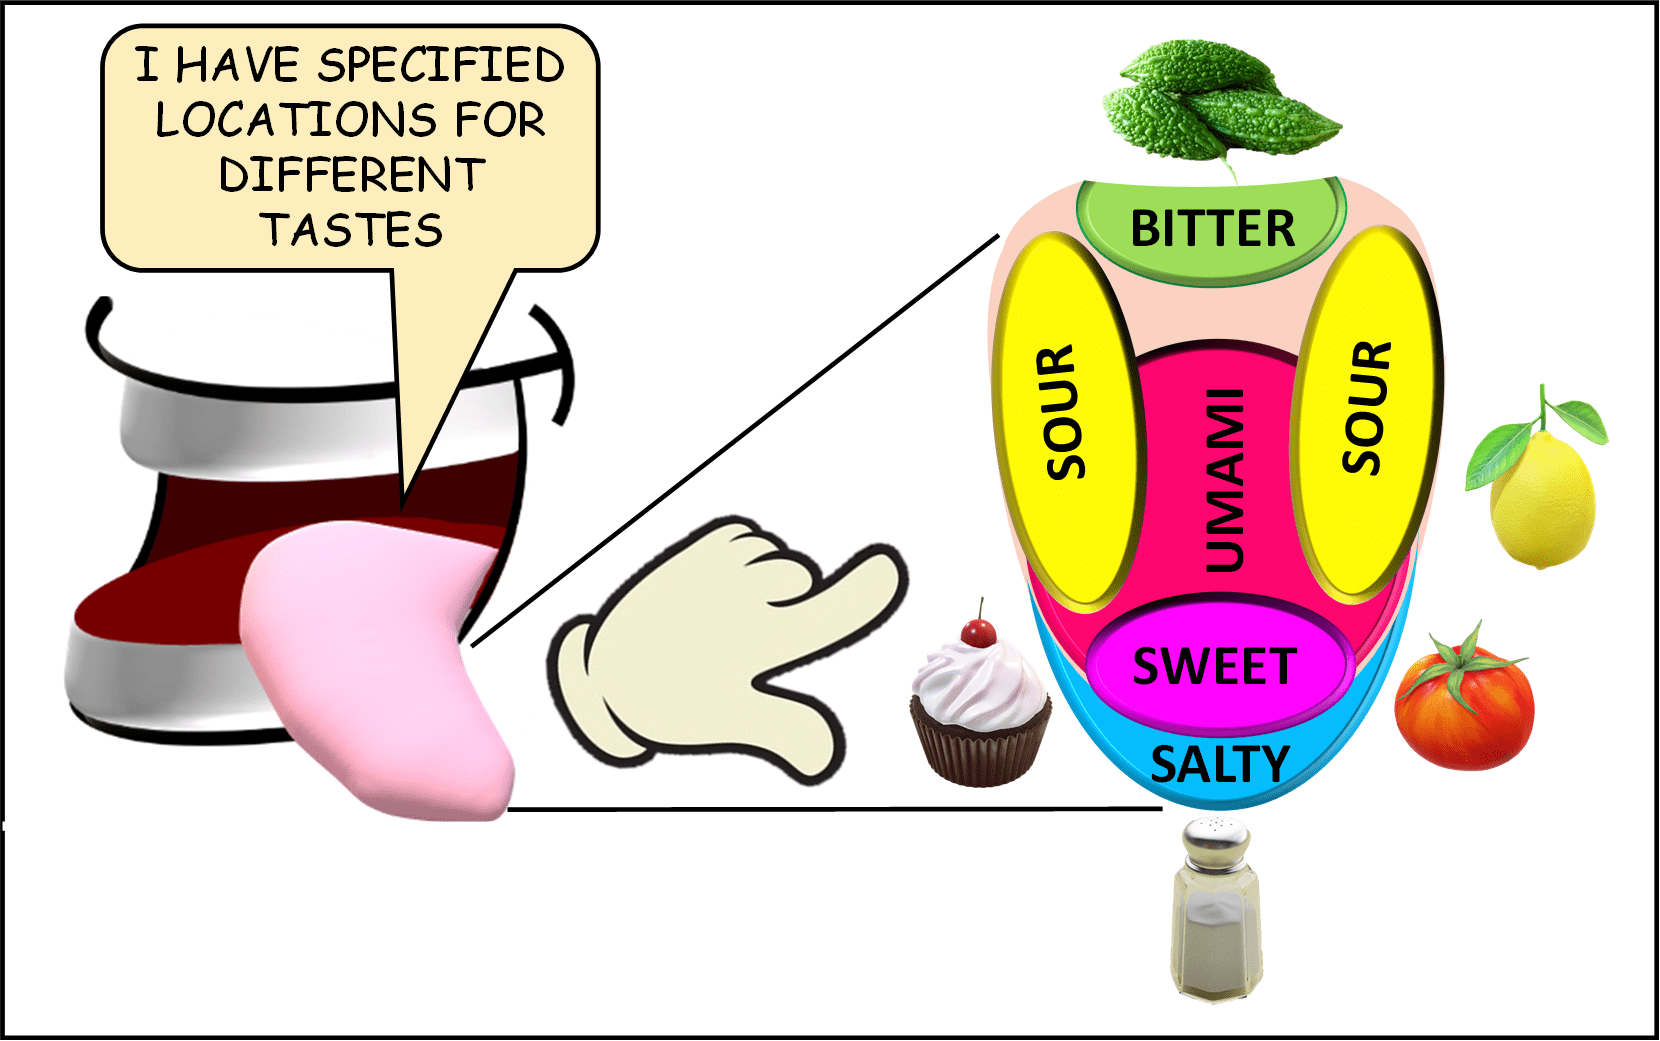 The taste map we have been studying is actually a misconception according to research. This diagram has been depicted for the sake of illustration